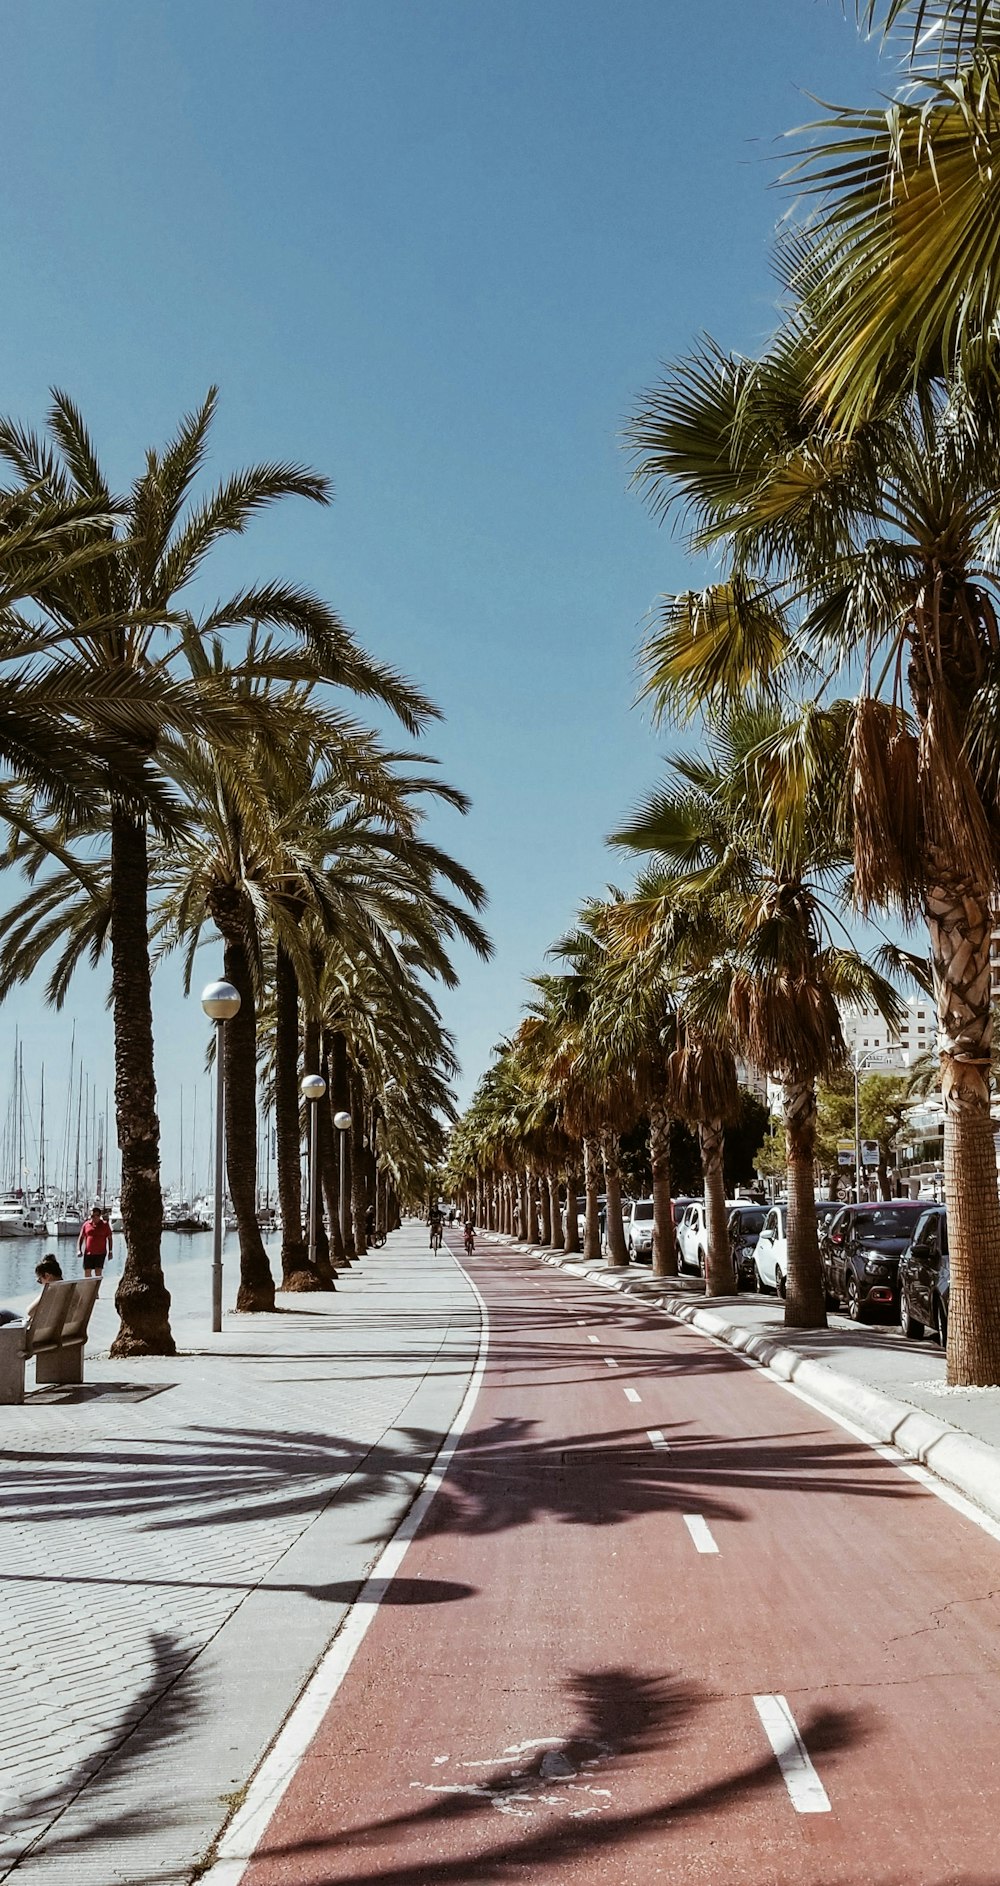 a street lined with palm trees next to the ocean